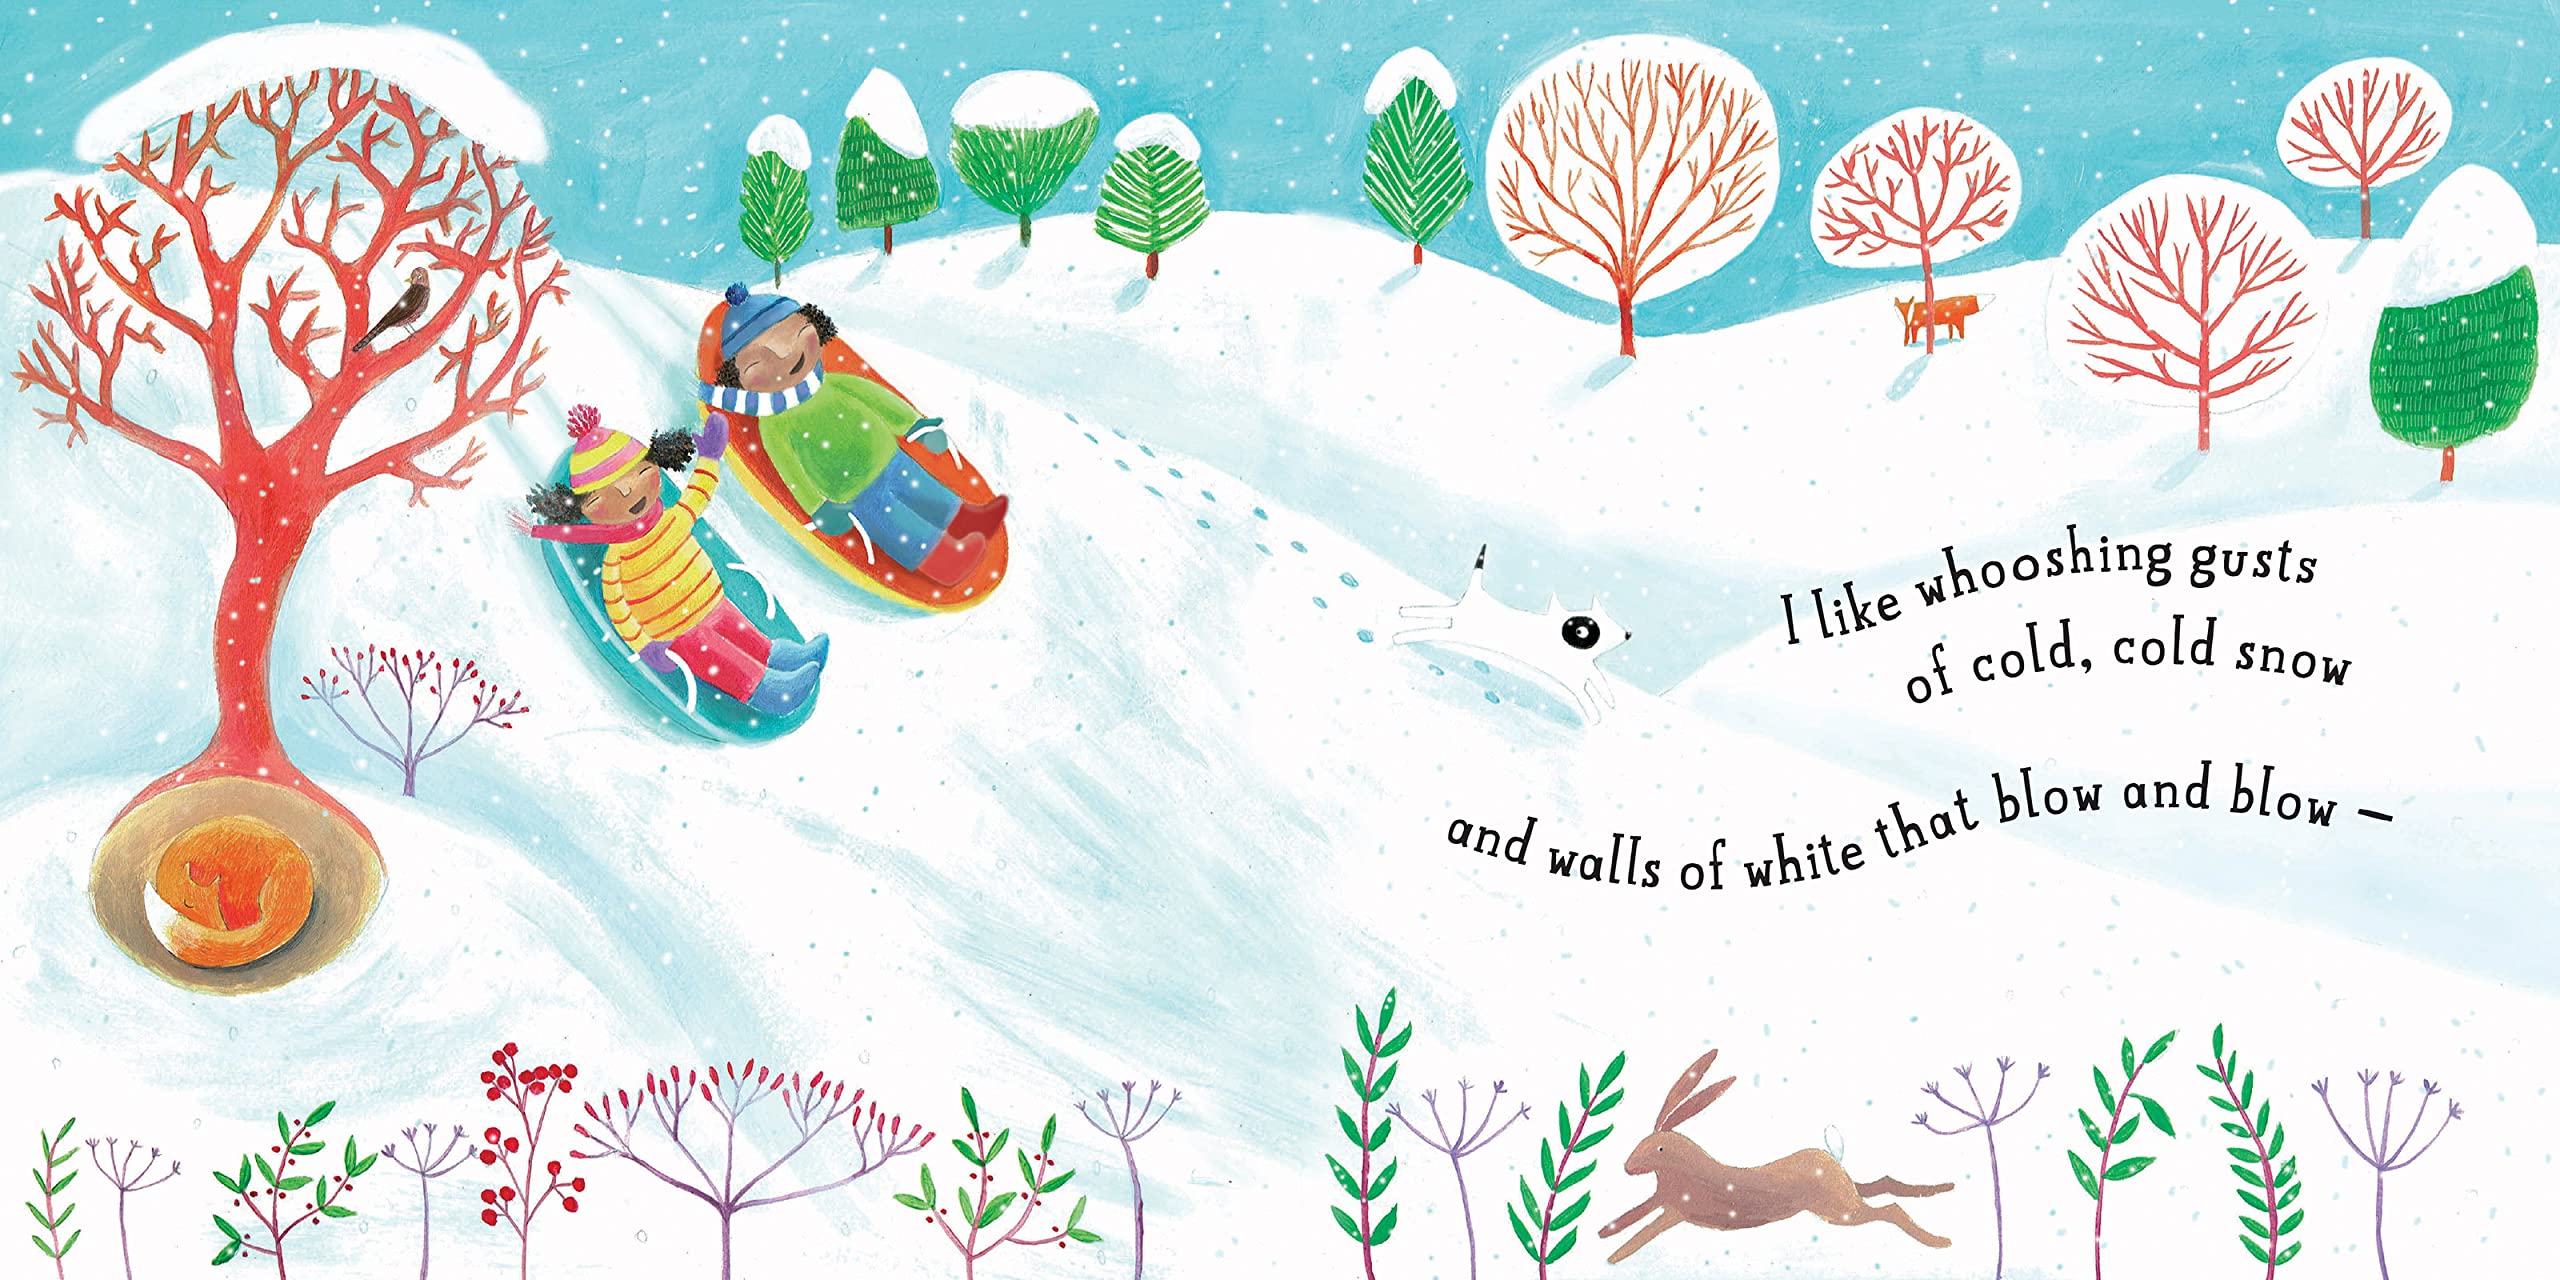 Illusstration showing 2 children tobogganing down a snow covered slope with trees